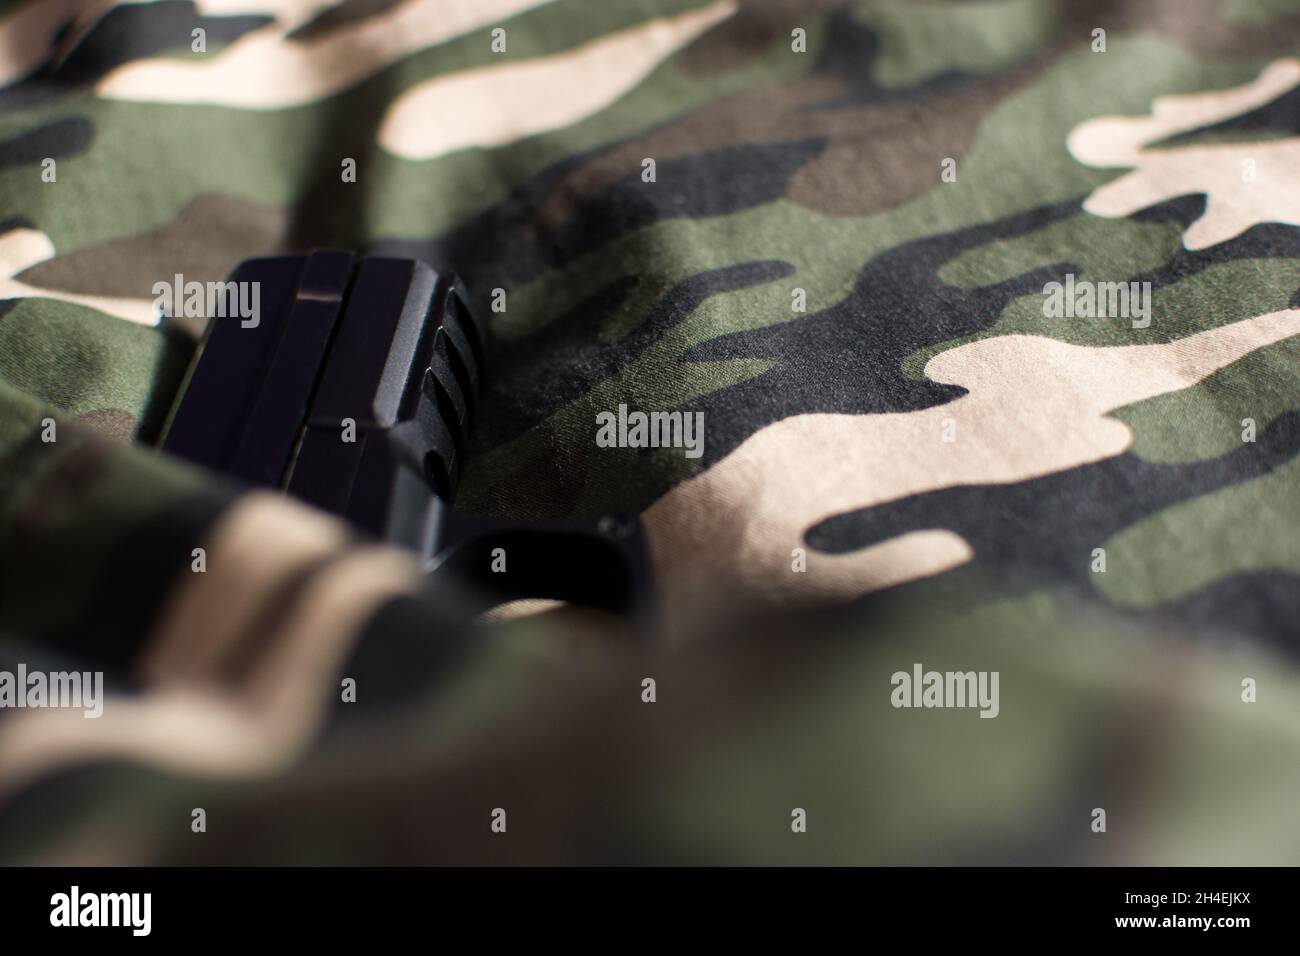 Black handgun, pistol wrapped in camouflage military uniform, copy space Stock Photo